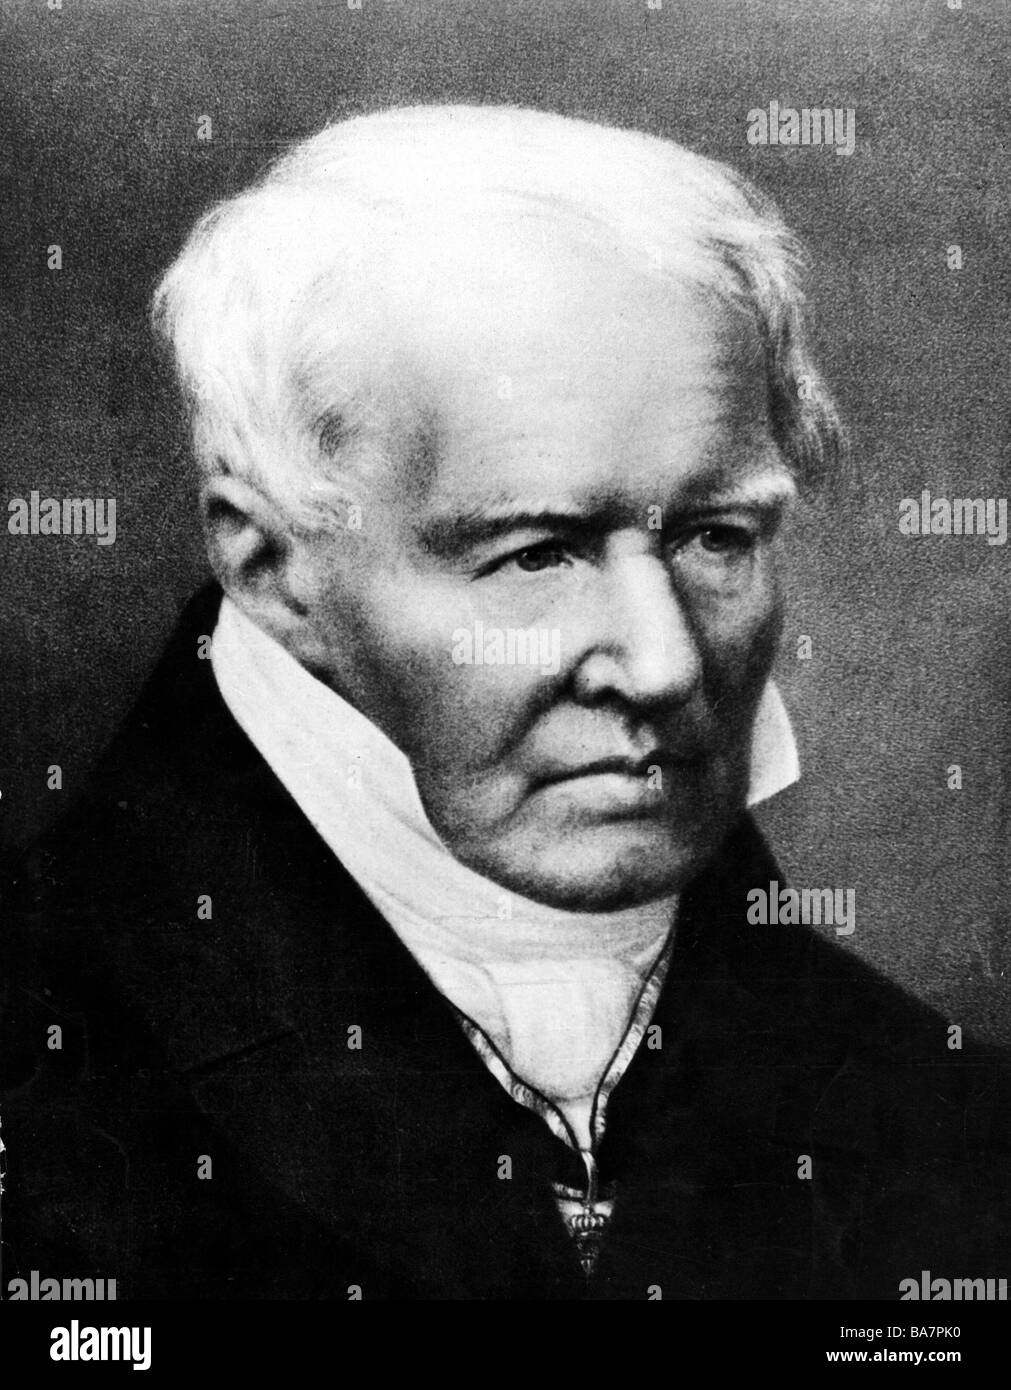 Humboldt, Alexander von, 14.9.1769 - 6.5.1859, German scientist (naturalist and geographer), portrait, after lithograph by Rohrbach, 19th century, , Stock Photo